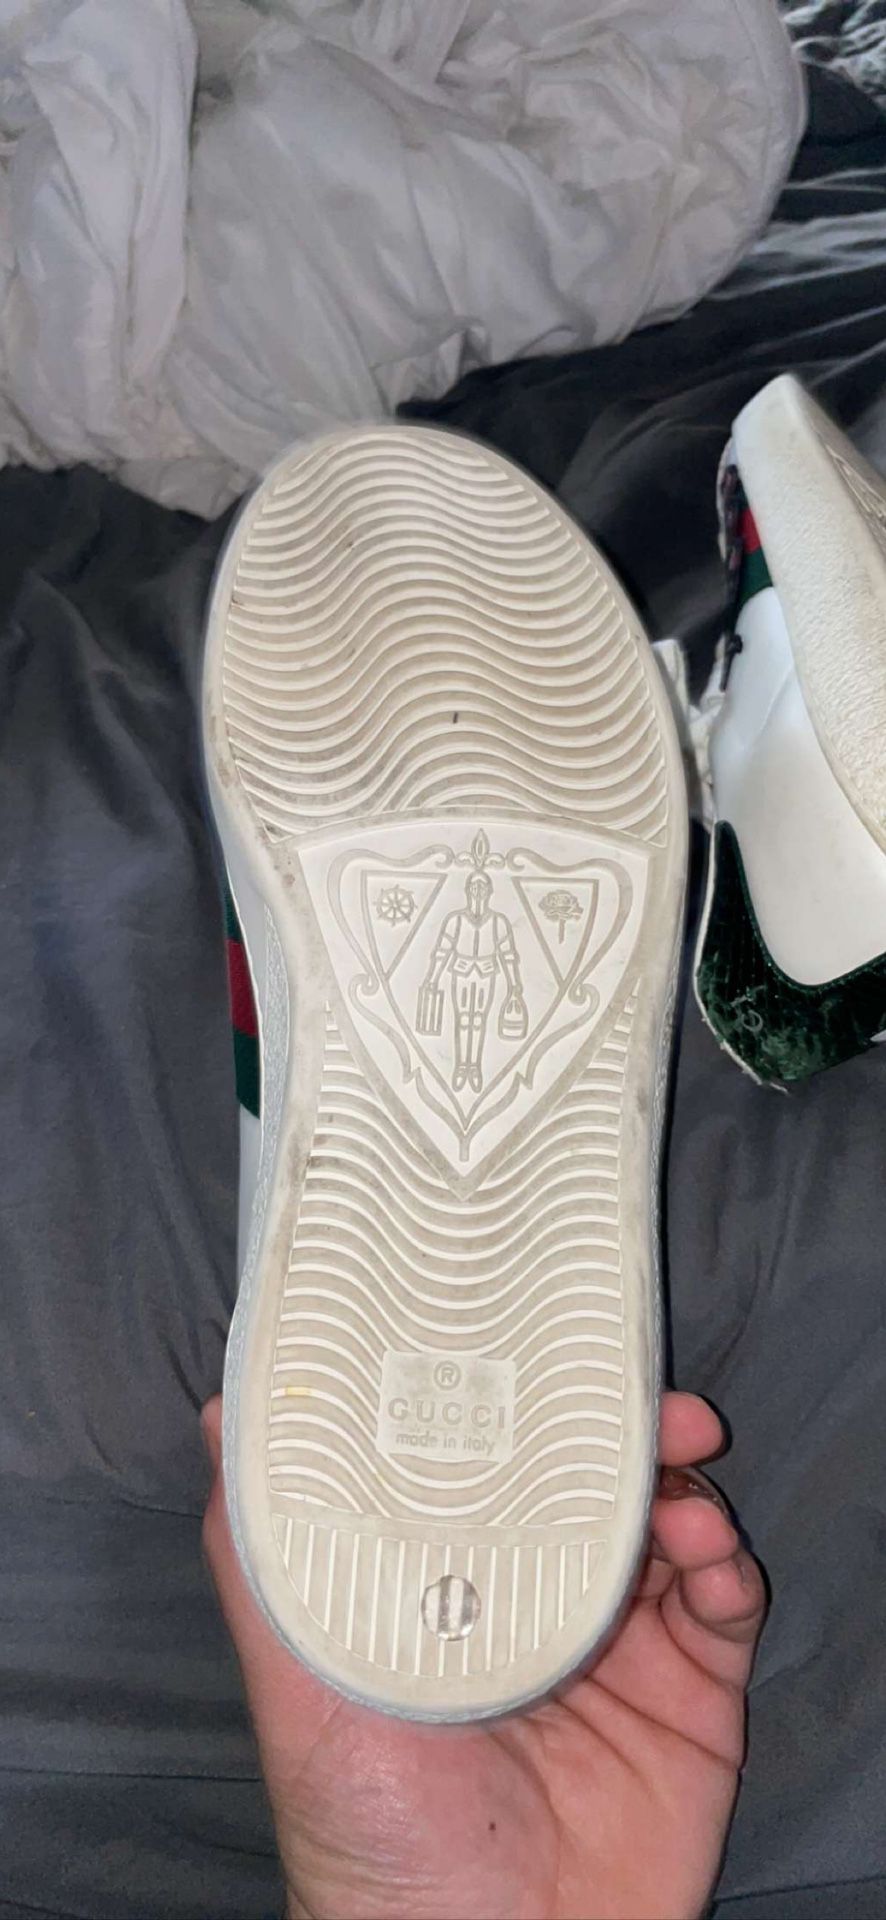 Gucci King Snake Shoes Sale in San Antonio, TX - OfferUp